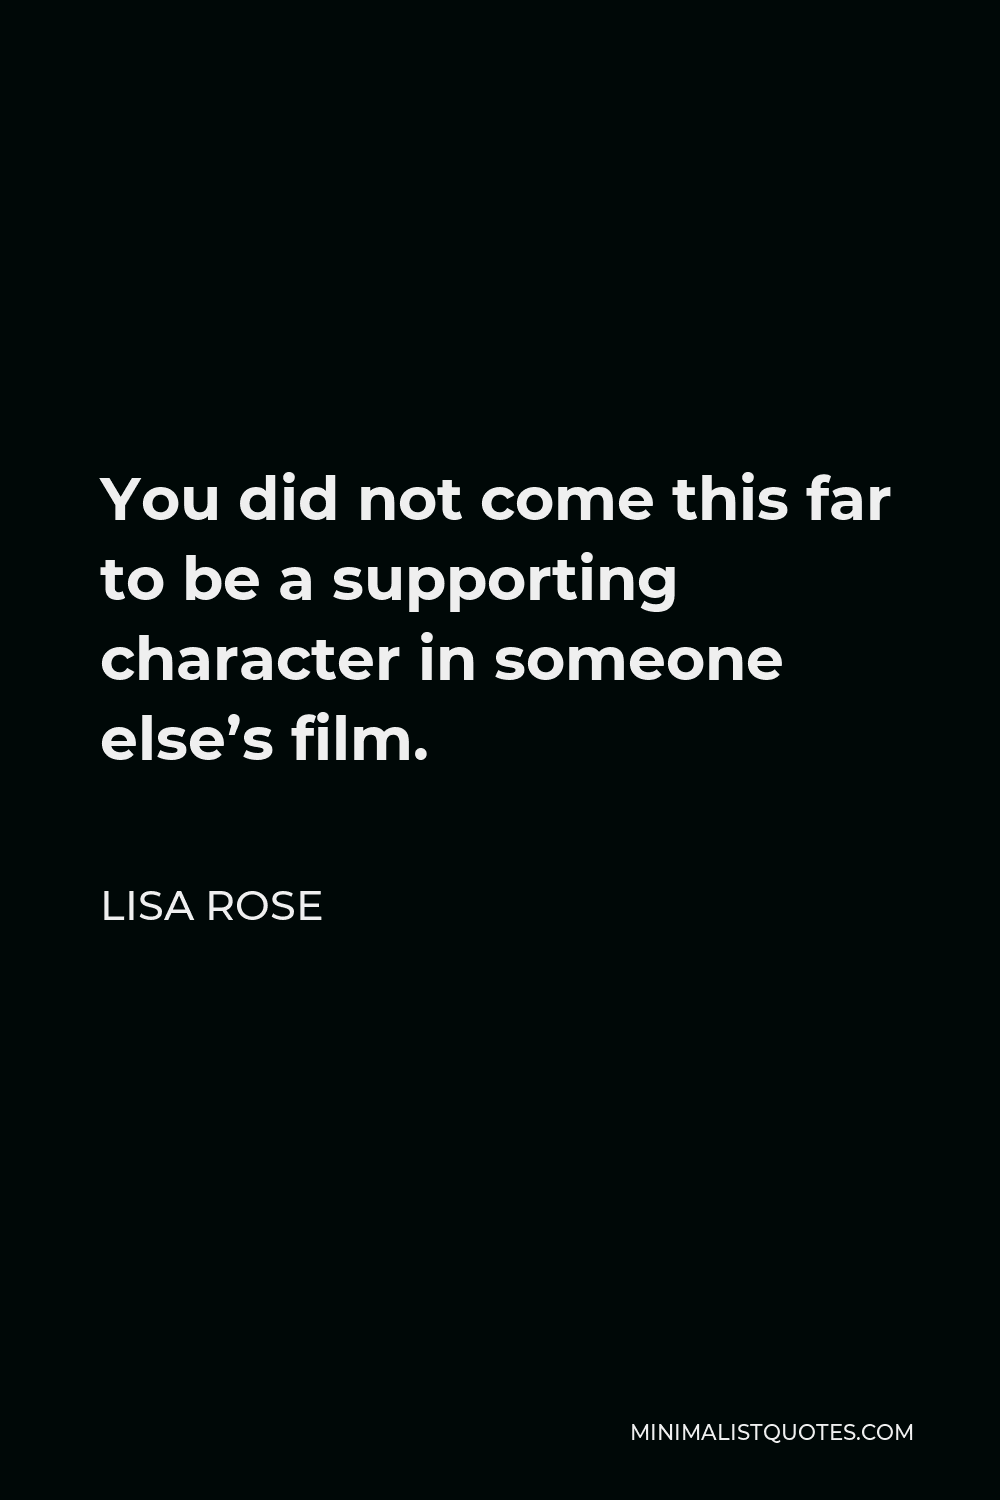 Lisa Rose Quote - You did not come this far to be a supporting character in someone else’s film.